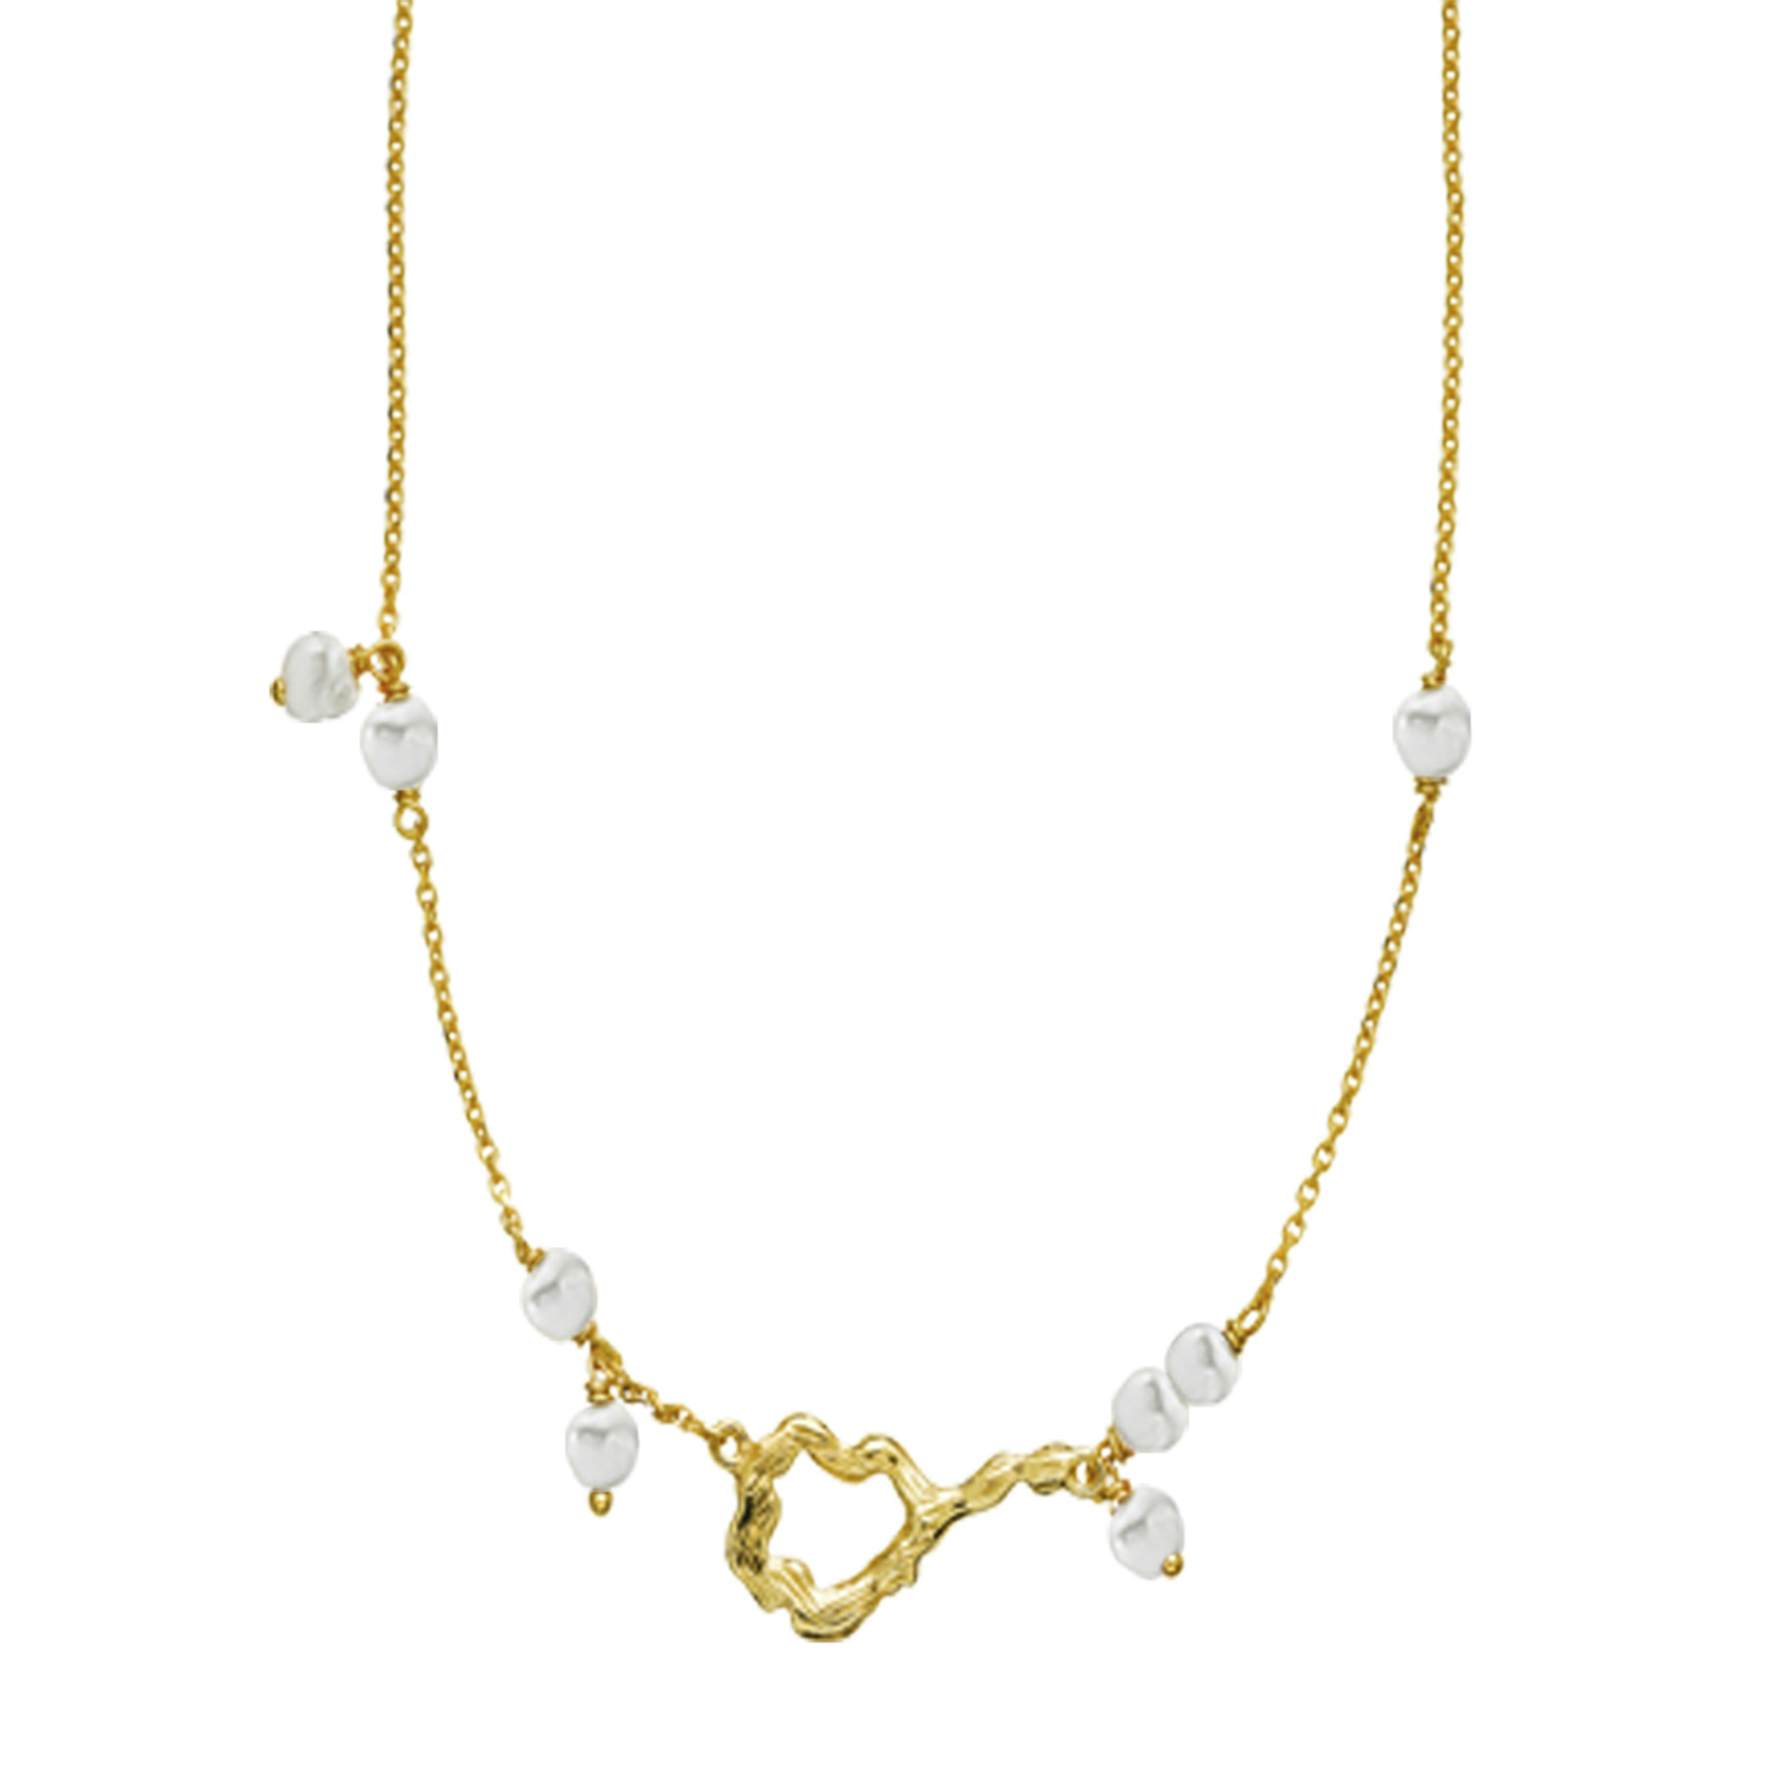 Lærke Bentsen By Sistie Necklace With Pearls